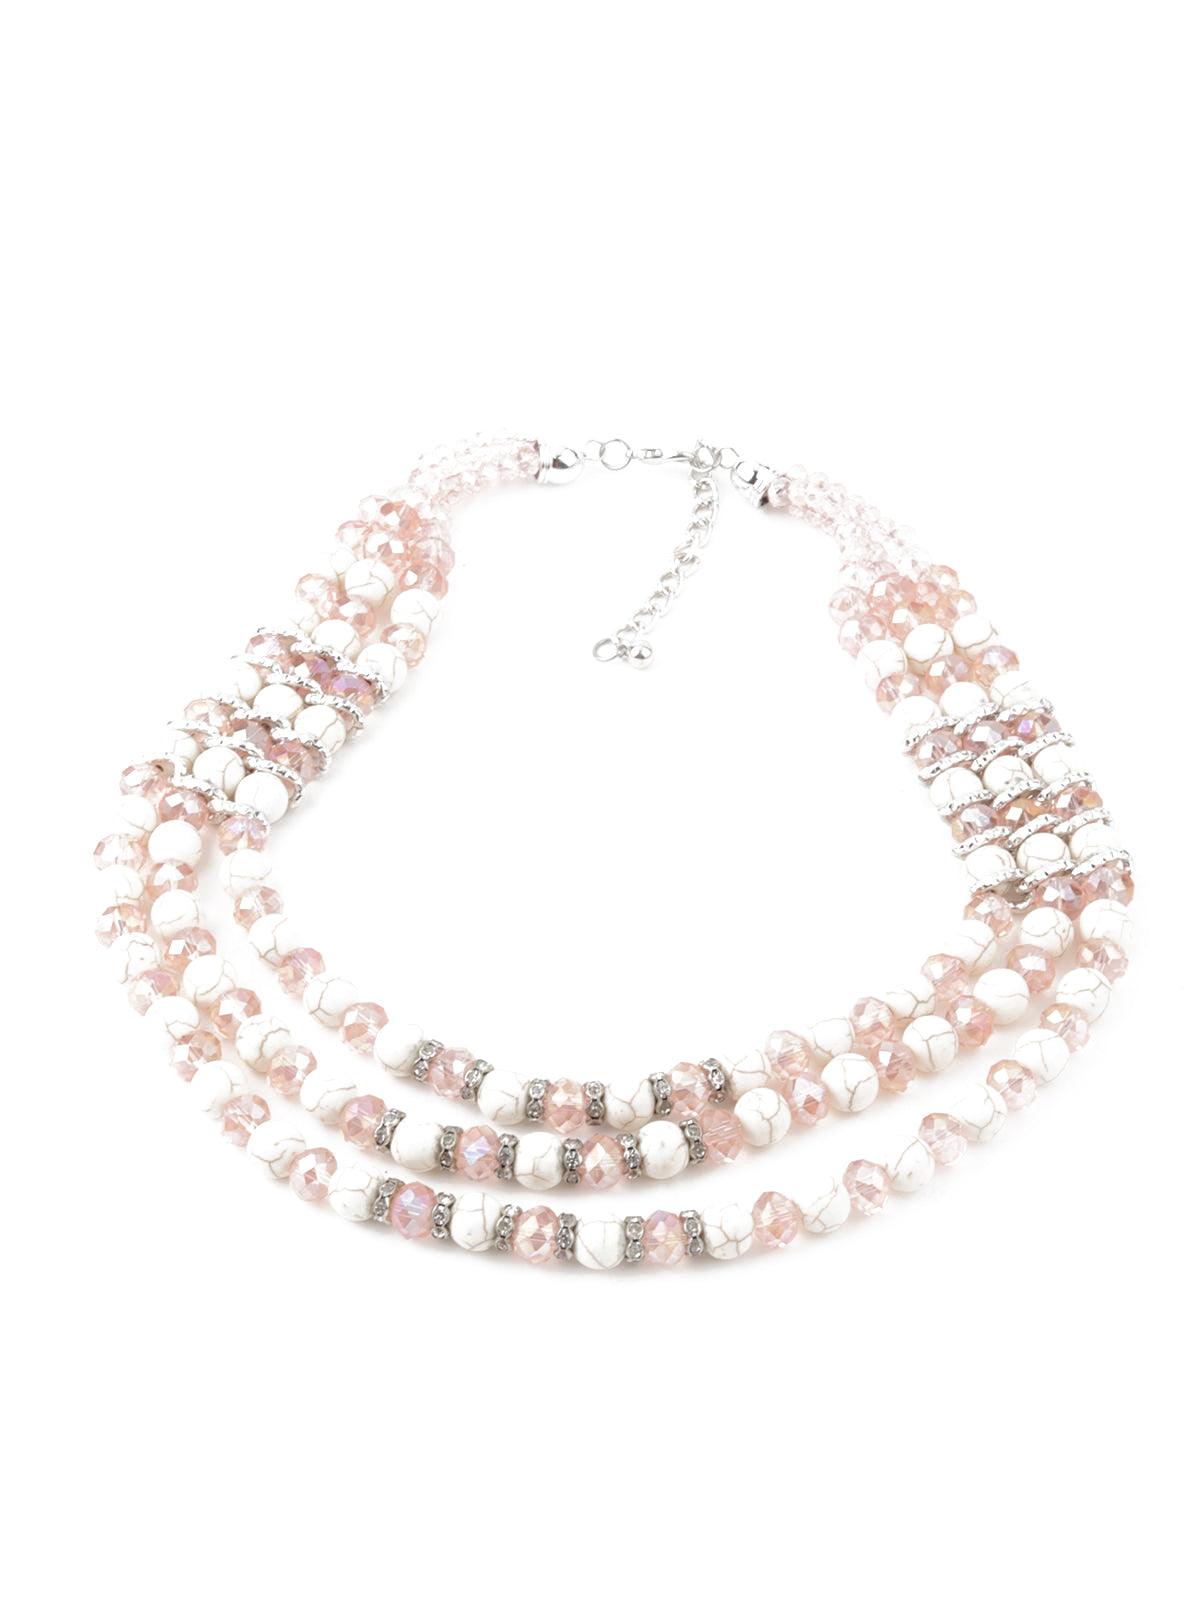 Off-White-Pink Classic Necklace - Odette